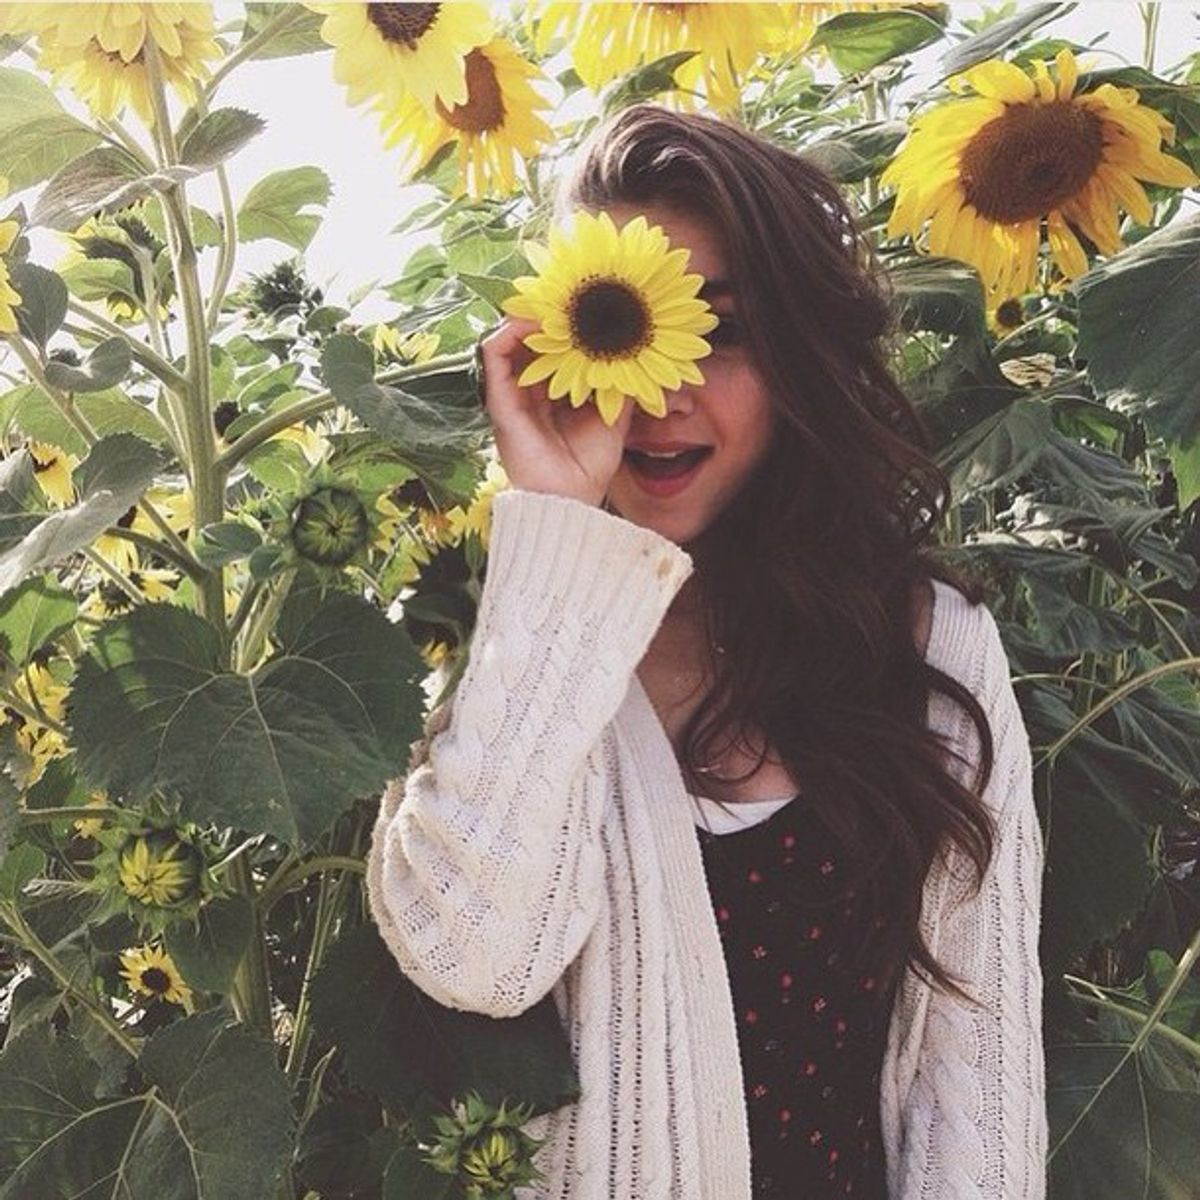 Why You Need To Be A Sunflower, Not A Doormat